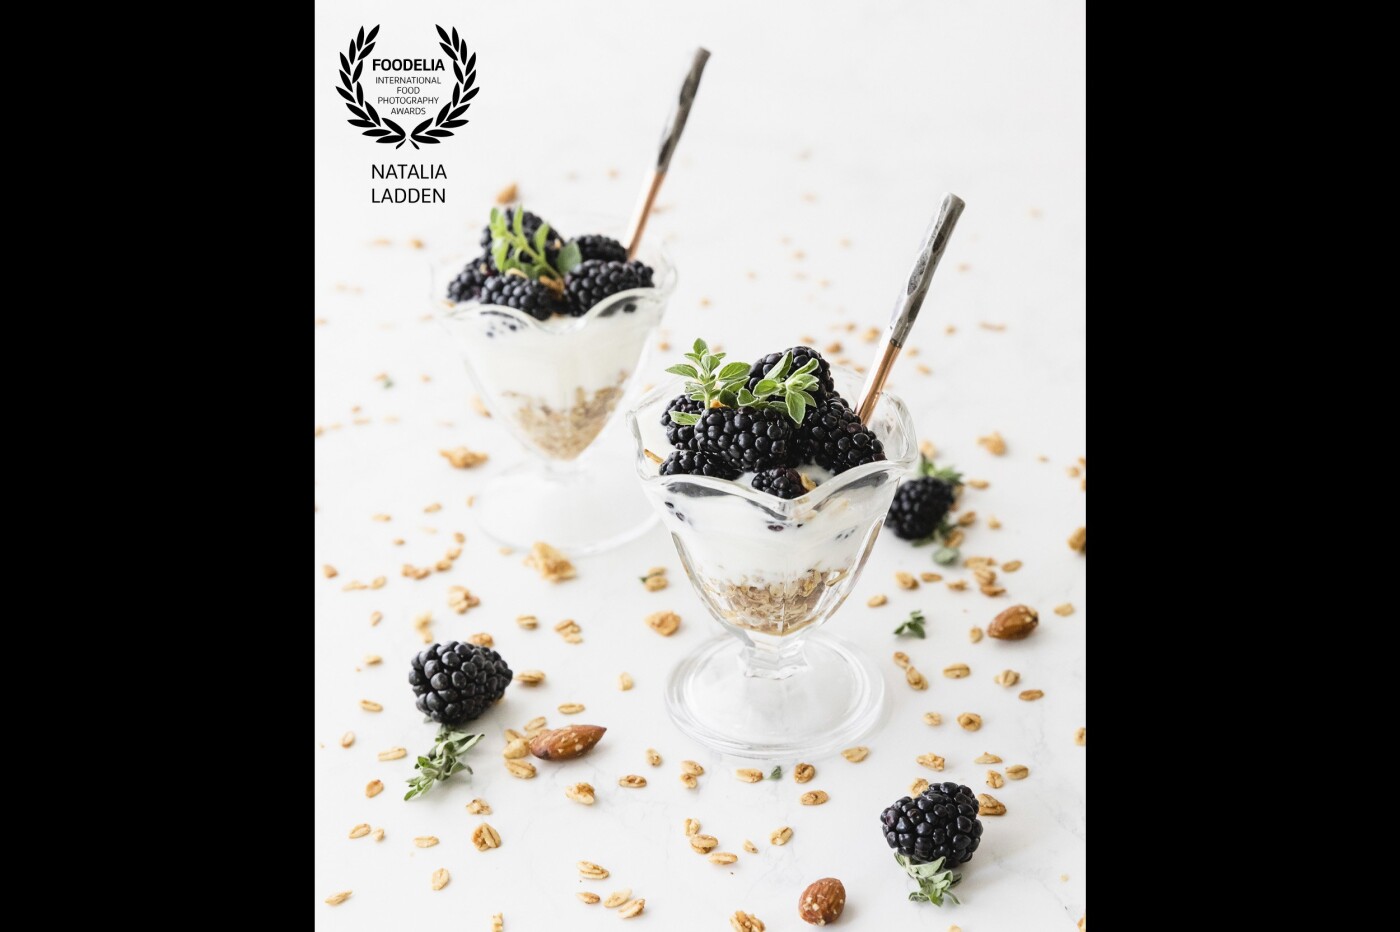 Granola and creamy yogurt parfaits topped with ripe blackberries. This series of shots were set up and shot in natural light and eaten right after :)